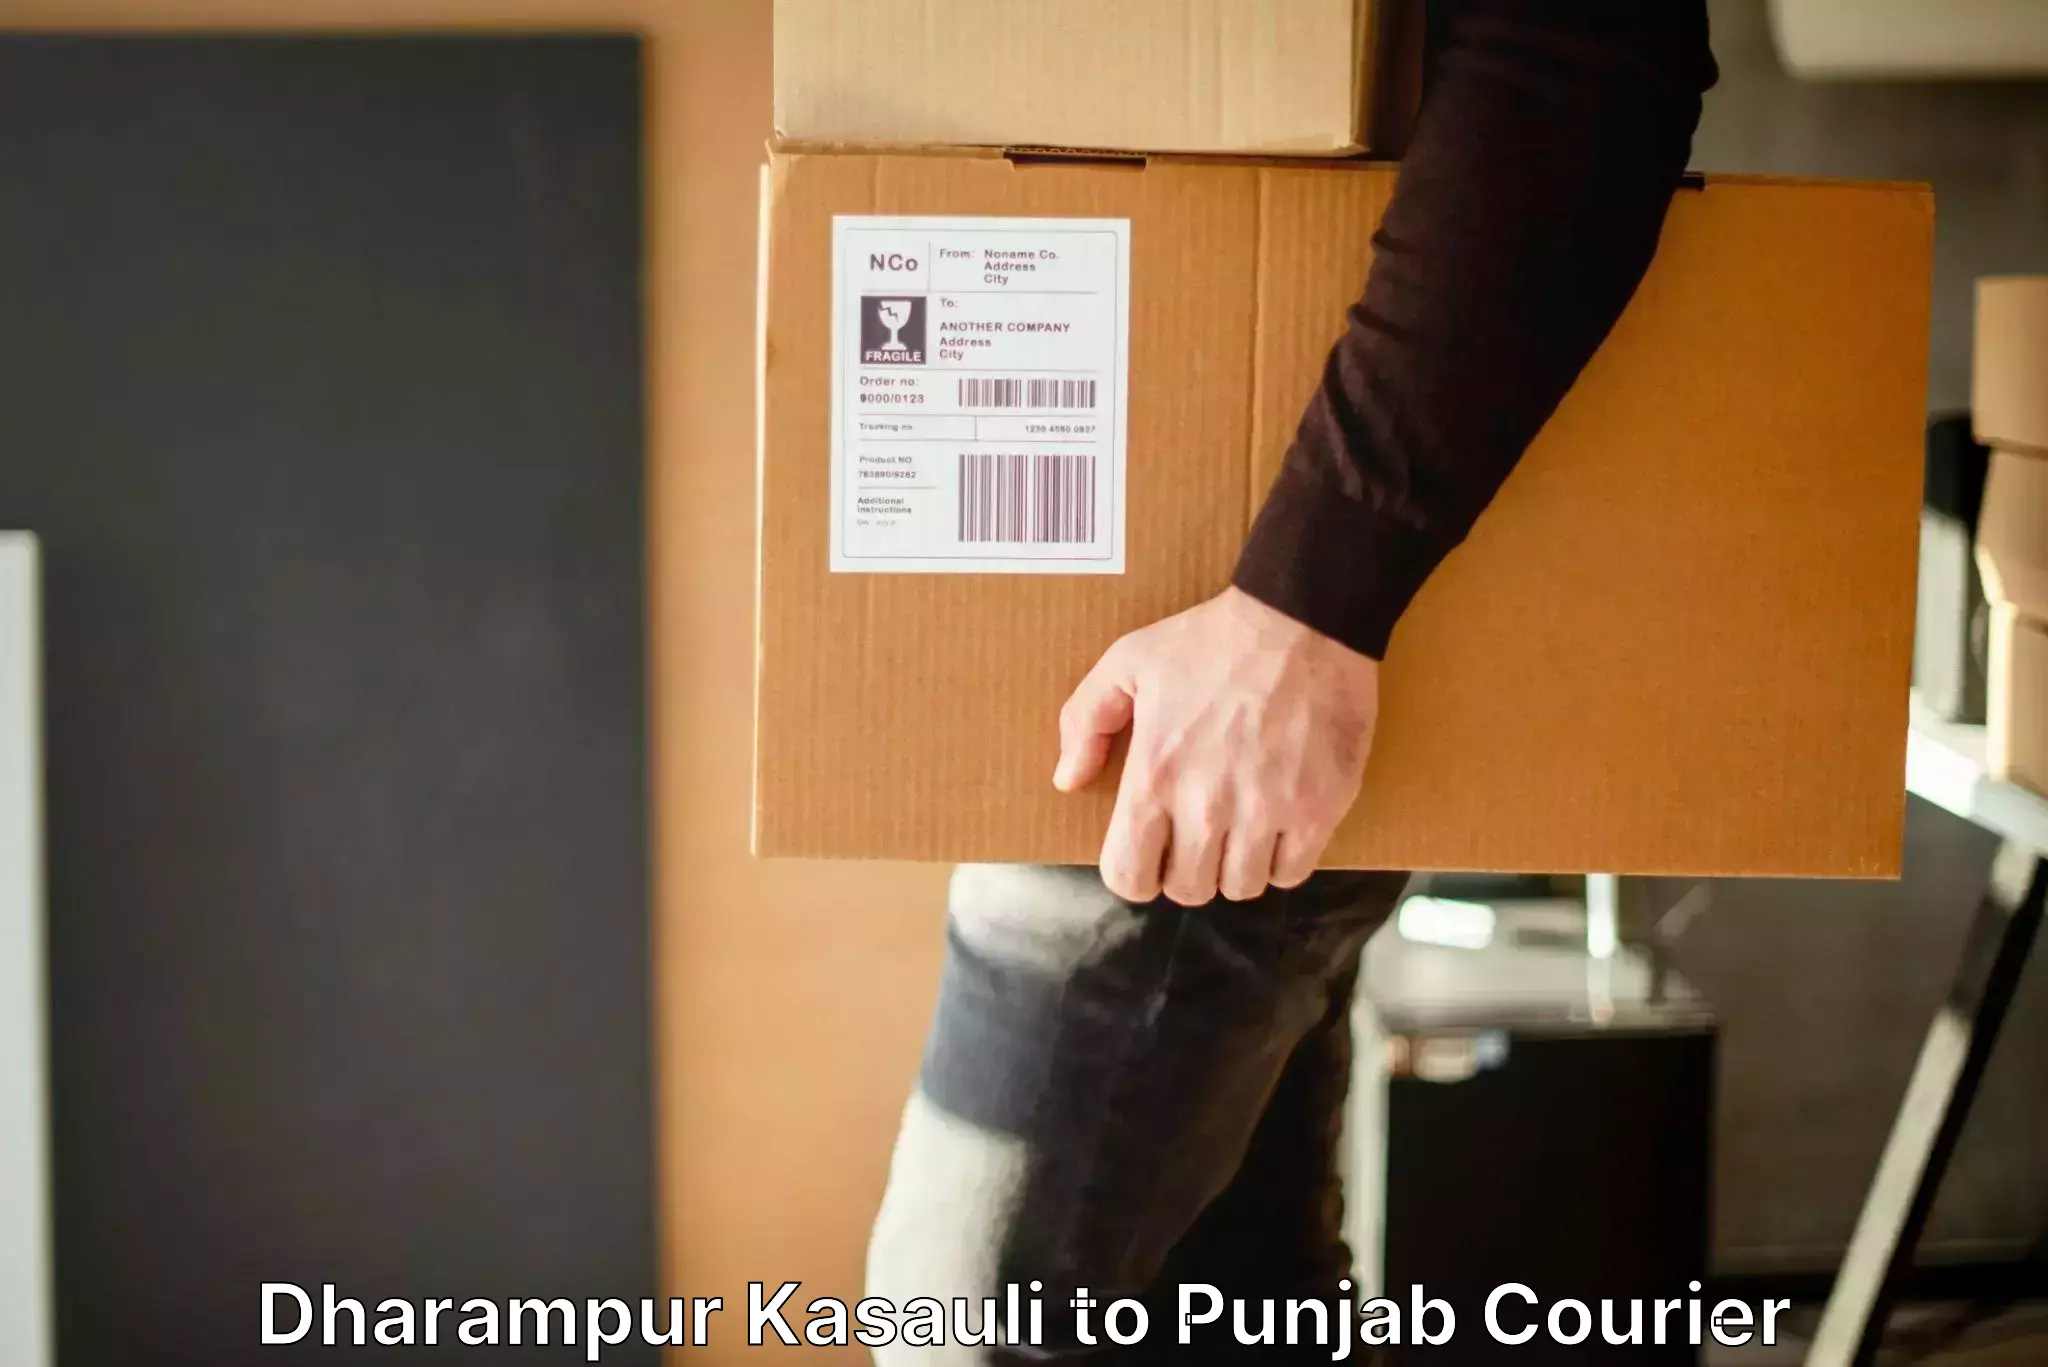 Luggage transport consulting Dharampur Kasauli to Firozpur